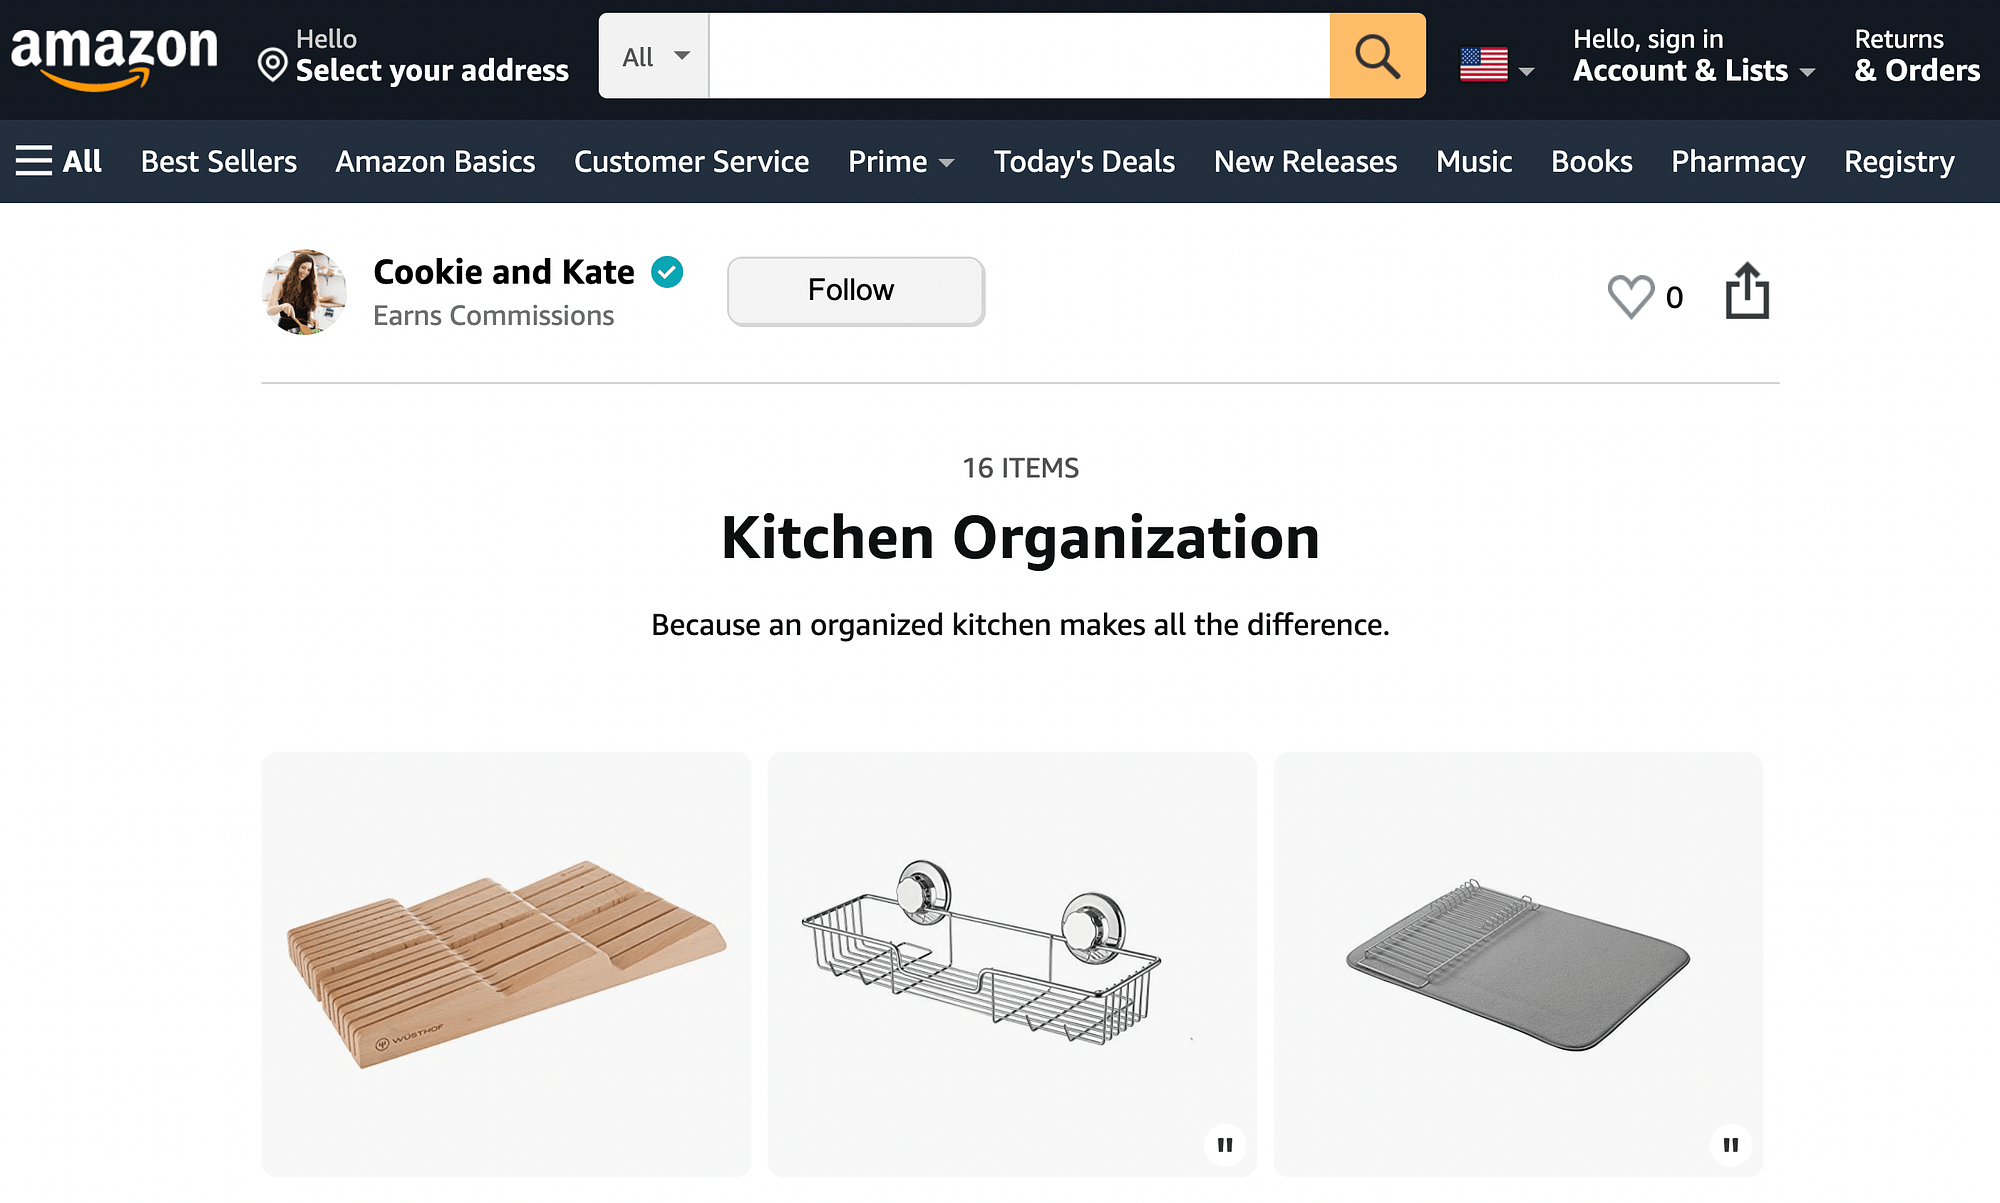 Amazon products in the kitchen organization category.